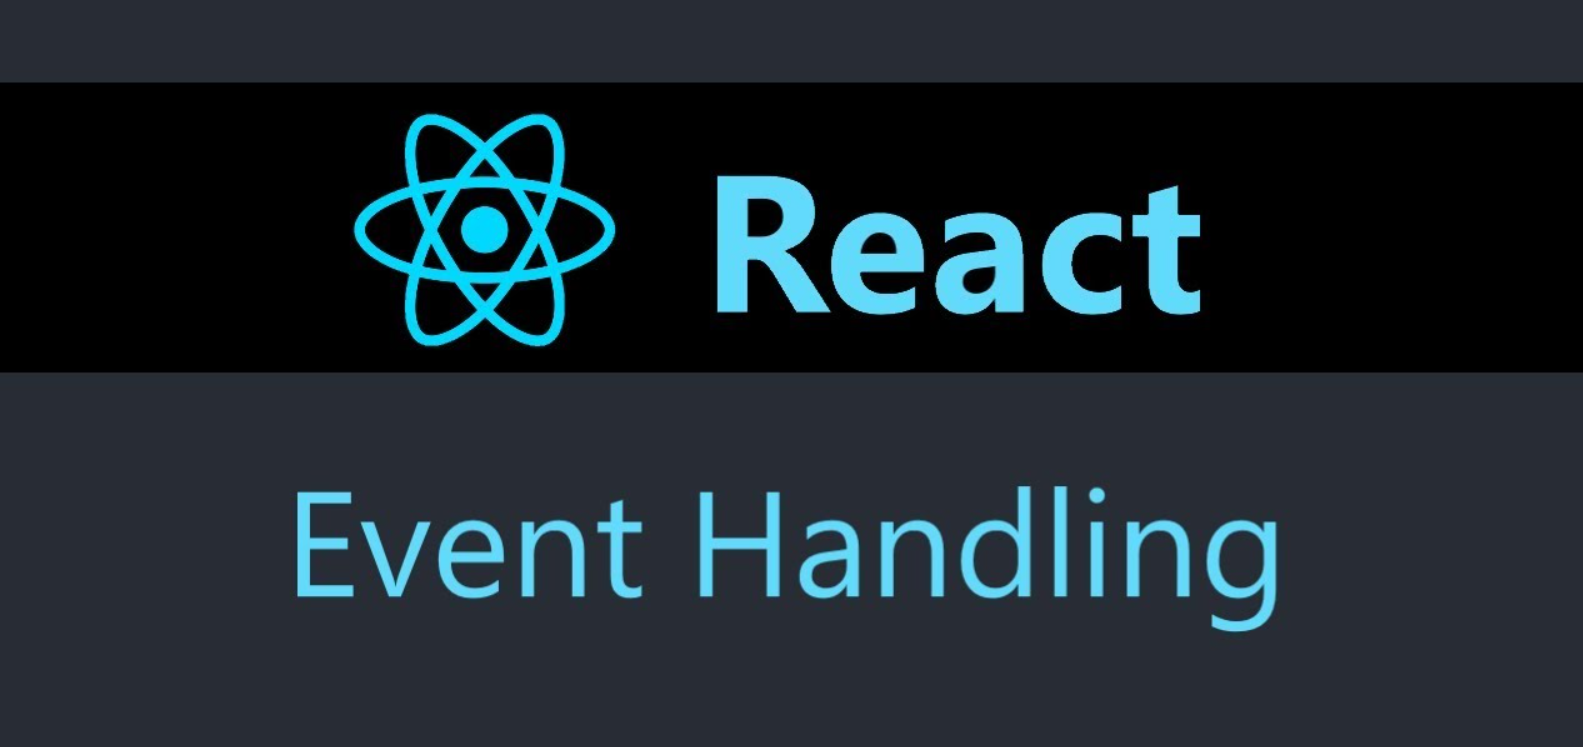 Reactjs onClick, onMouseOverCapture events working exmple